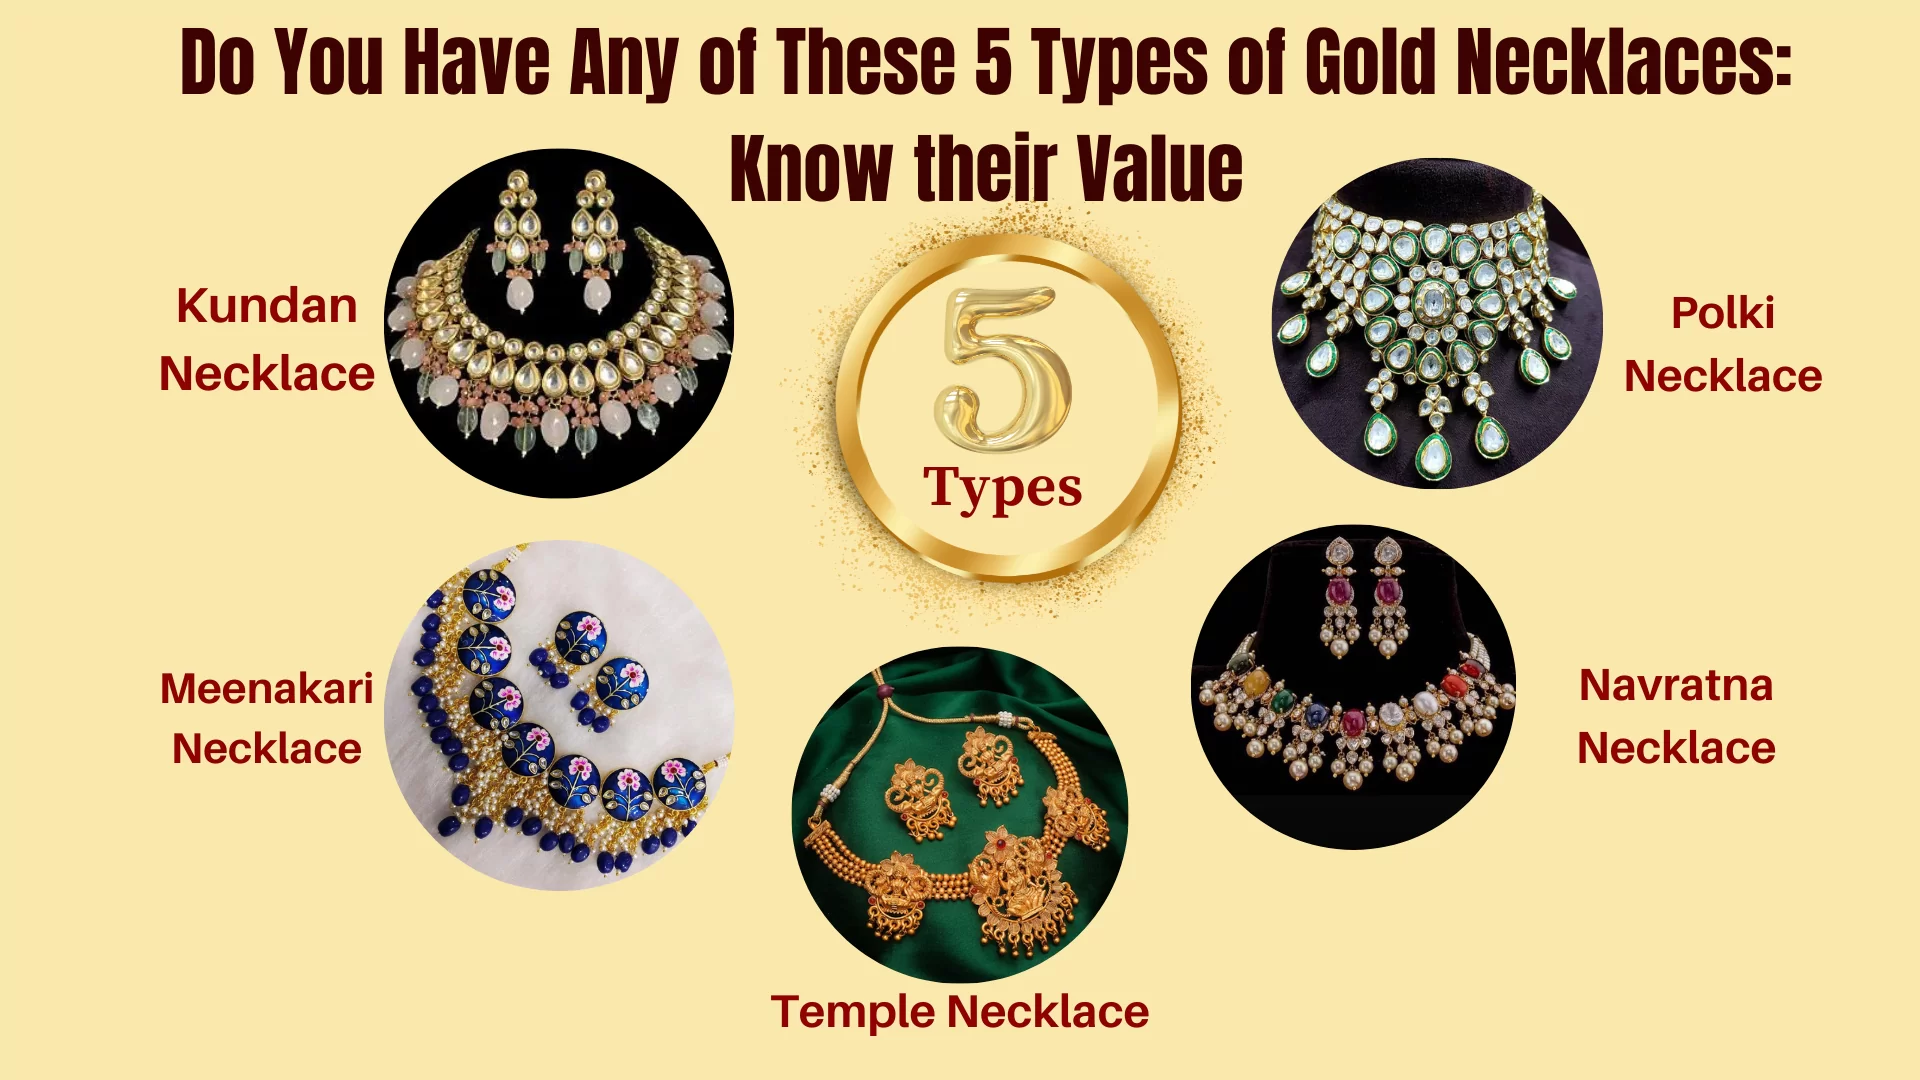 Do You Have Any of These 5 Types of Gold Necklaces: Know their Value